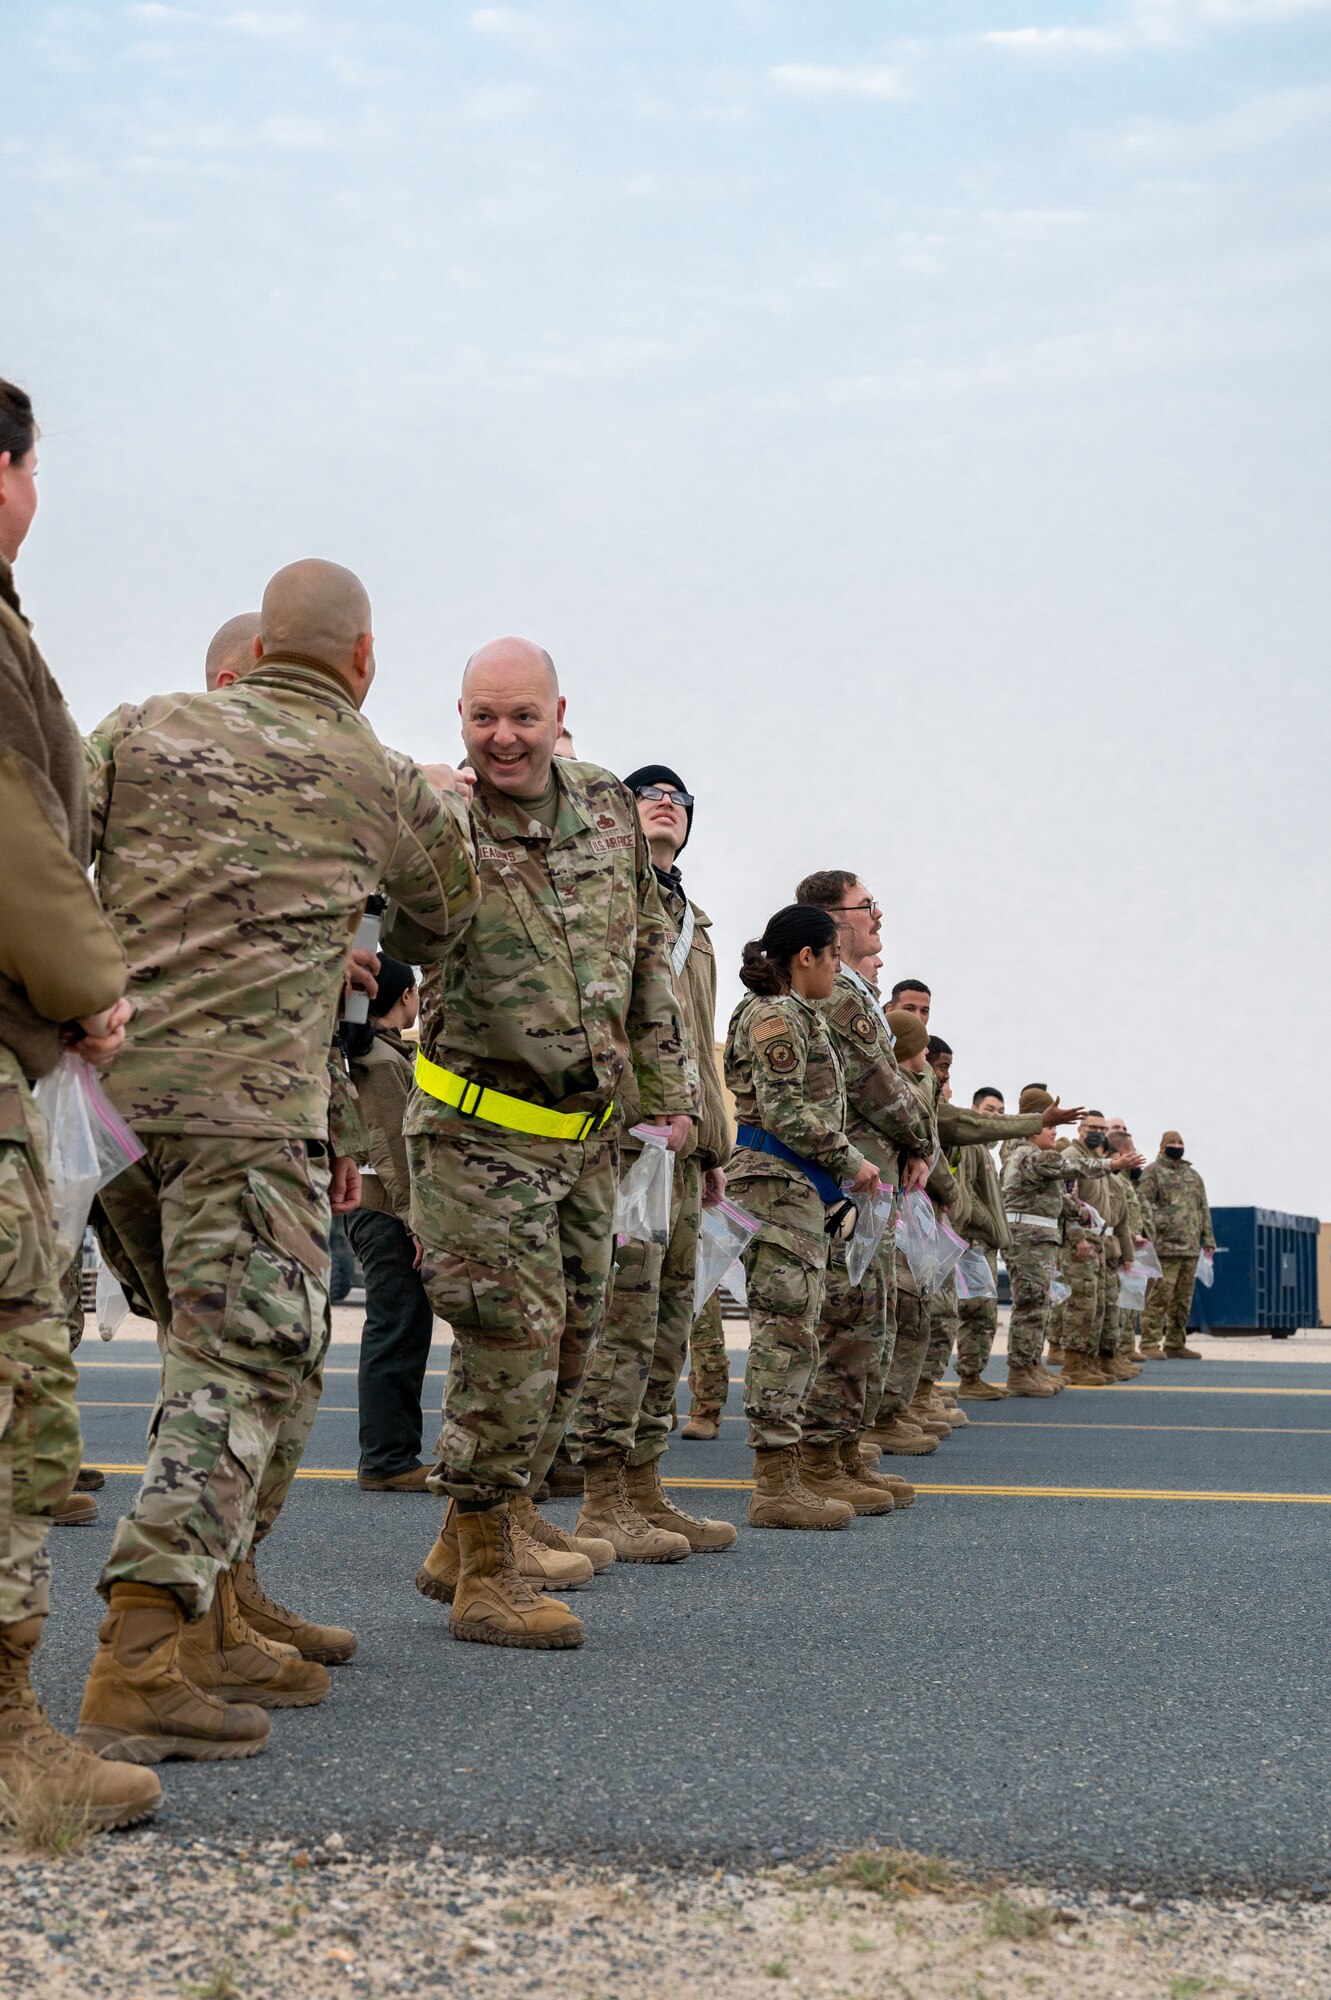 Airmen from the 386th Expeditionary Maintenance Group, including some from the 407th Expeditionary Operations Support Squadron, conduct FOD walks weekly.